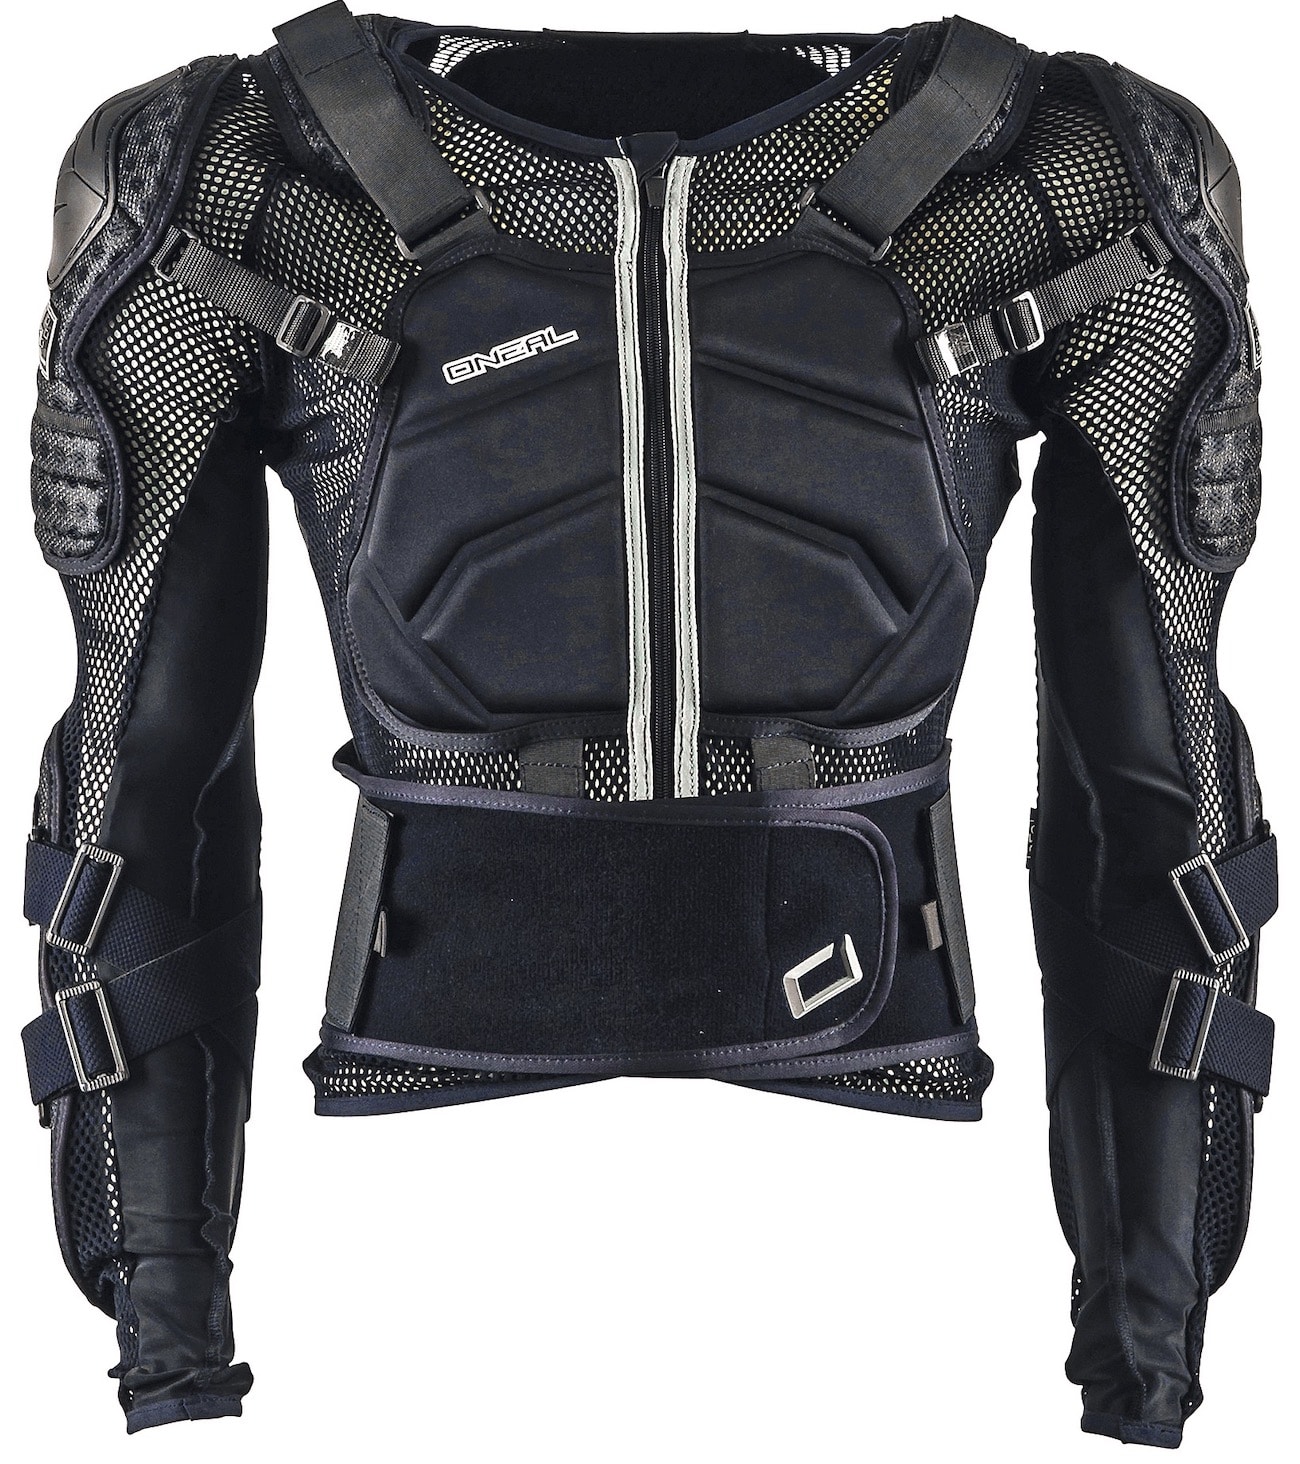 Black, Small ONeal Under Dog 3 Unisex-Adult Body Armor 